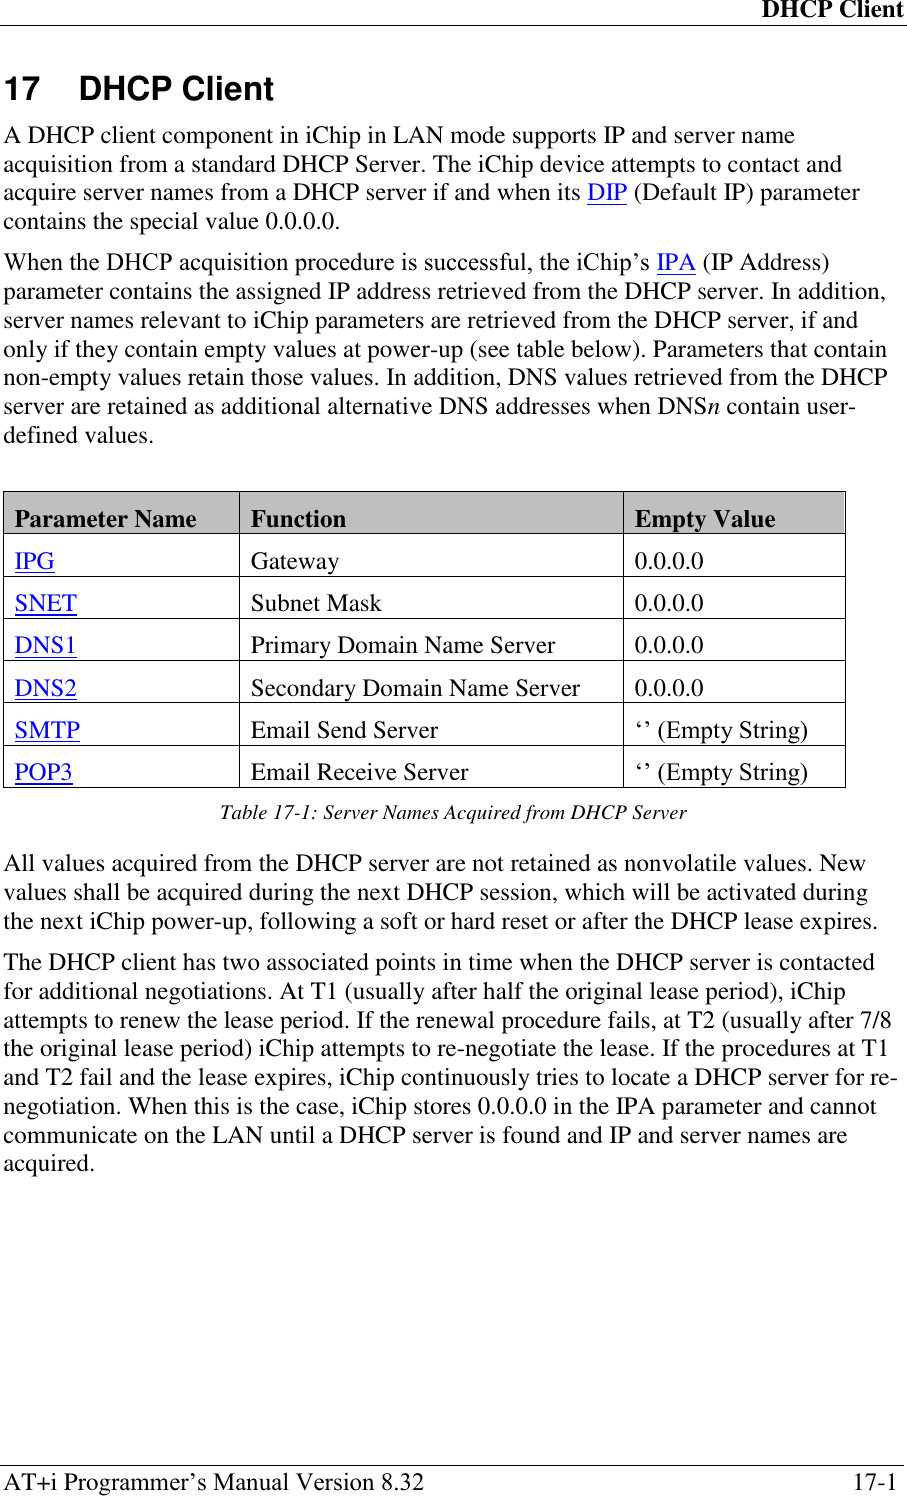 DHCP Client AT+i Programmer‘s Manual Version 8.32  17-1 17  DHCP Client A DHCP client component in iChip in LAN mode supports IP and server name acquisition from a standard DHCP Server. The iChip device attempts to contact and acquire server names from a DHCP server if and when its DIP (Default IP) parameter contains the special value 0.0.0.0. When the DHCP acquisition procedure is successful, the iChip‘s IPA (IP Address) parameter contains the assigned IP address retrieved from the DHCP server. In addition, server names relevant to iChip parameters are retrieved from the DHCP server, if and only if they contain empty values at power-up (see table below). Parameters that contain non-empty values retain those values. In addition, DNS values retrieved from the DHCP server are retained as additional alternative DNS addresses when DNSn contain user-defined values.  Parameter Name Function Empty Value IPG Gateway 0.0.0.0 SNET Subnet Mask 0.0.0.0 DNS1 Primary Domain Name Server 0.0.0.0 DNS2 Secondary Domain Name Server 0.0.0.0 SMTP Email Send Server ‗‘ (Empty String) POP3 Email Receive Server ‗‘ (Empty String) Table 17-1: Server Names Acquired from DHCP Server All values acquired from the DHCP server are not retained as nonvolatile values. New values shall be acquired during the next DHCP session, which will be activated during the next iChip power-up, following a soft or hard reset or after the DHCP lease expires. The DHCP client has two associated points in time when the DHCP server is contacted for additional negotiations. At T1 (usually after half the original lease period), iChip attempts to renew the lease period. If the renewal procedure fails, at T2 (usually after 7/8 the original lease period) iChip attempts to re-negotiate the lease. If the procedures at T1 and T2 fail and the lease expires, iChip continuously tries to locate a DHCP server for re-negotiation. When this is the case, iChip stores 0.0.0.0 in the IPA parameter and cannot communicate on the LAN until a DHCP server is found and IP and server names are acquired.  